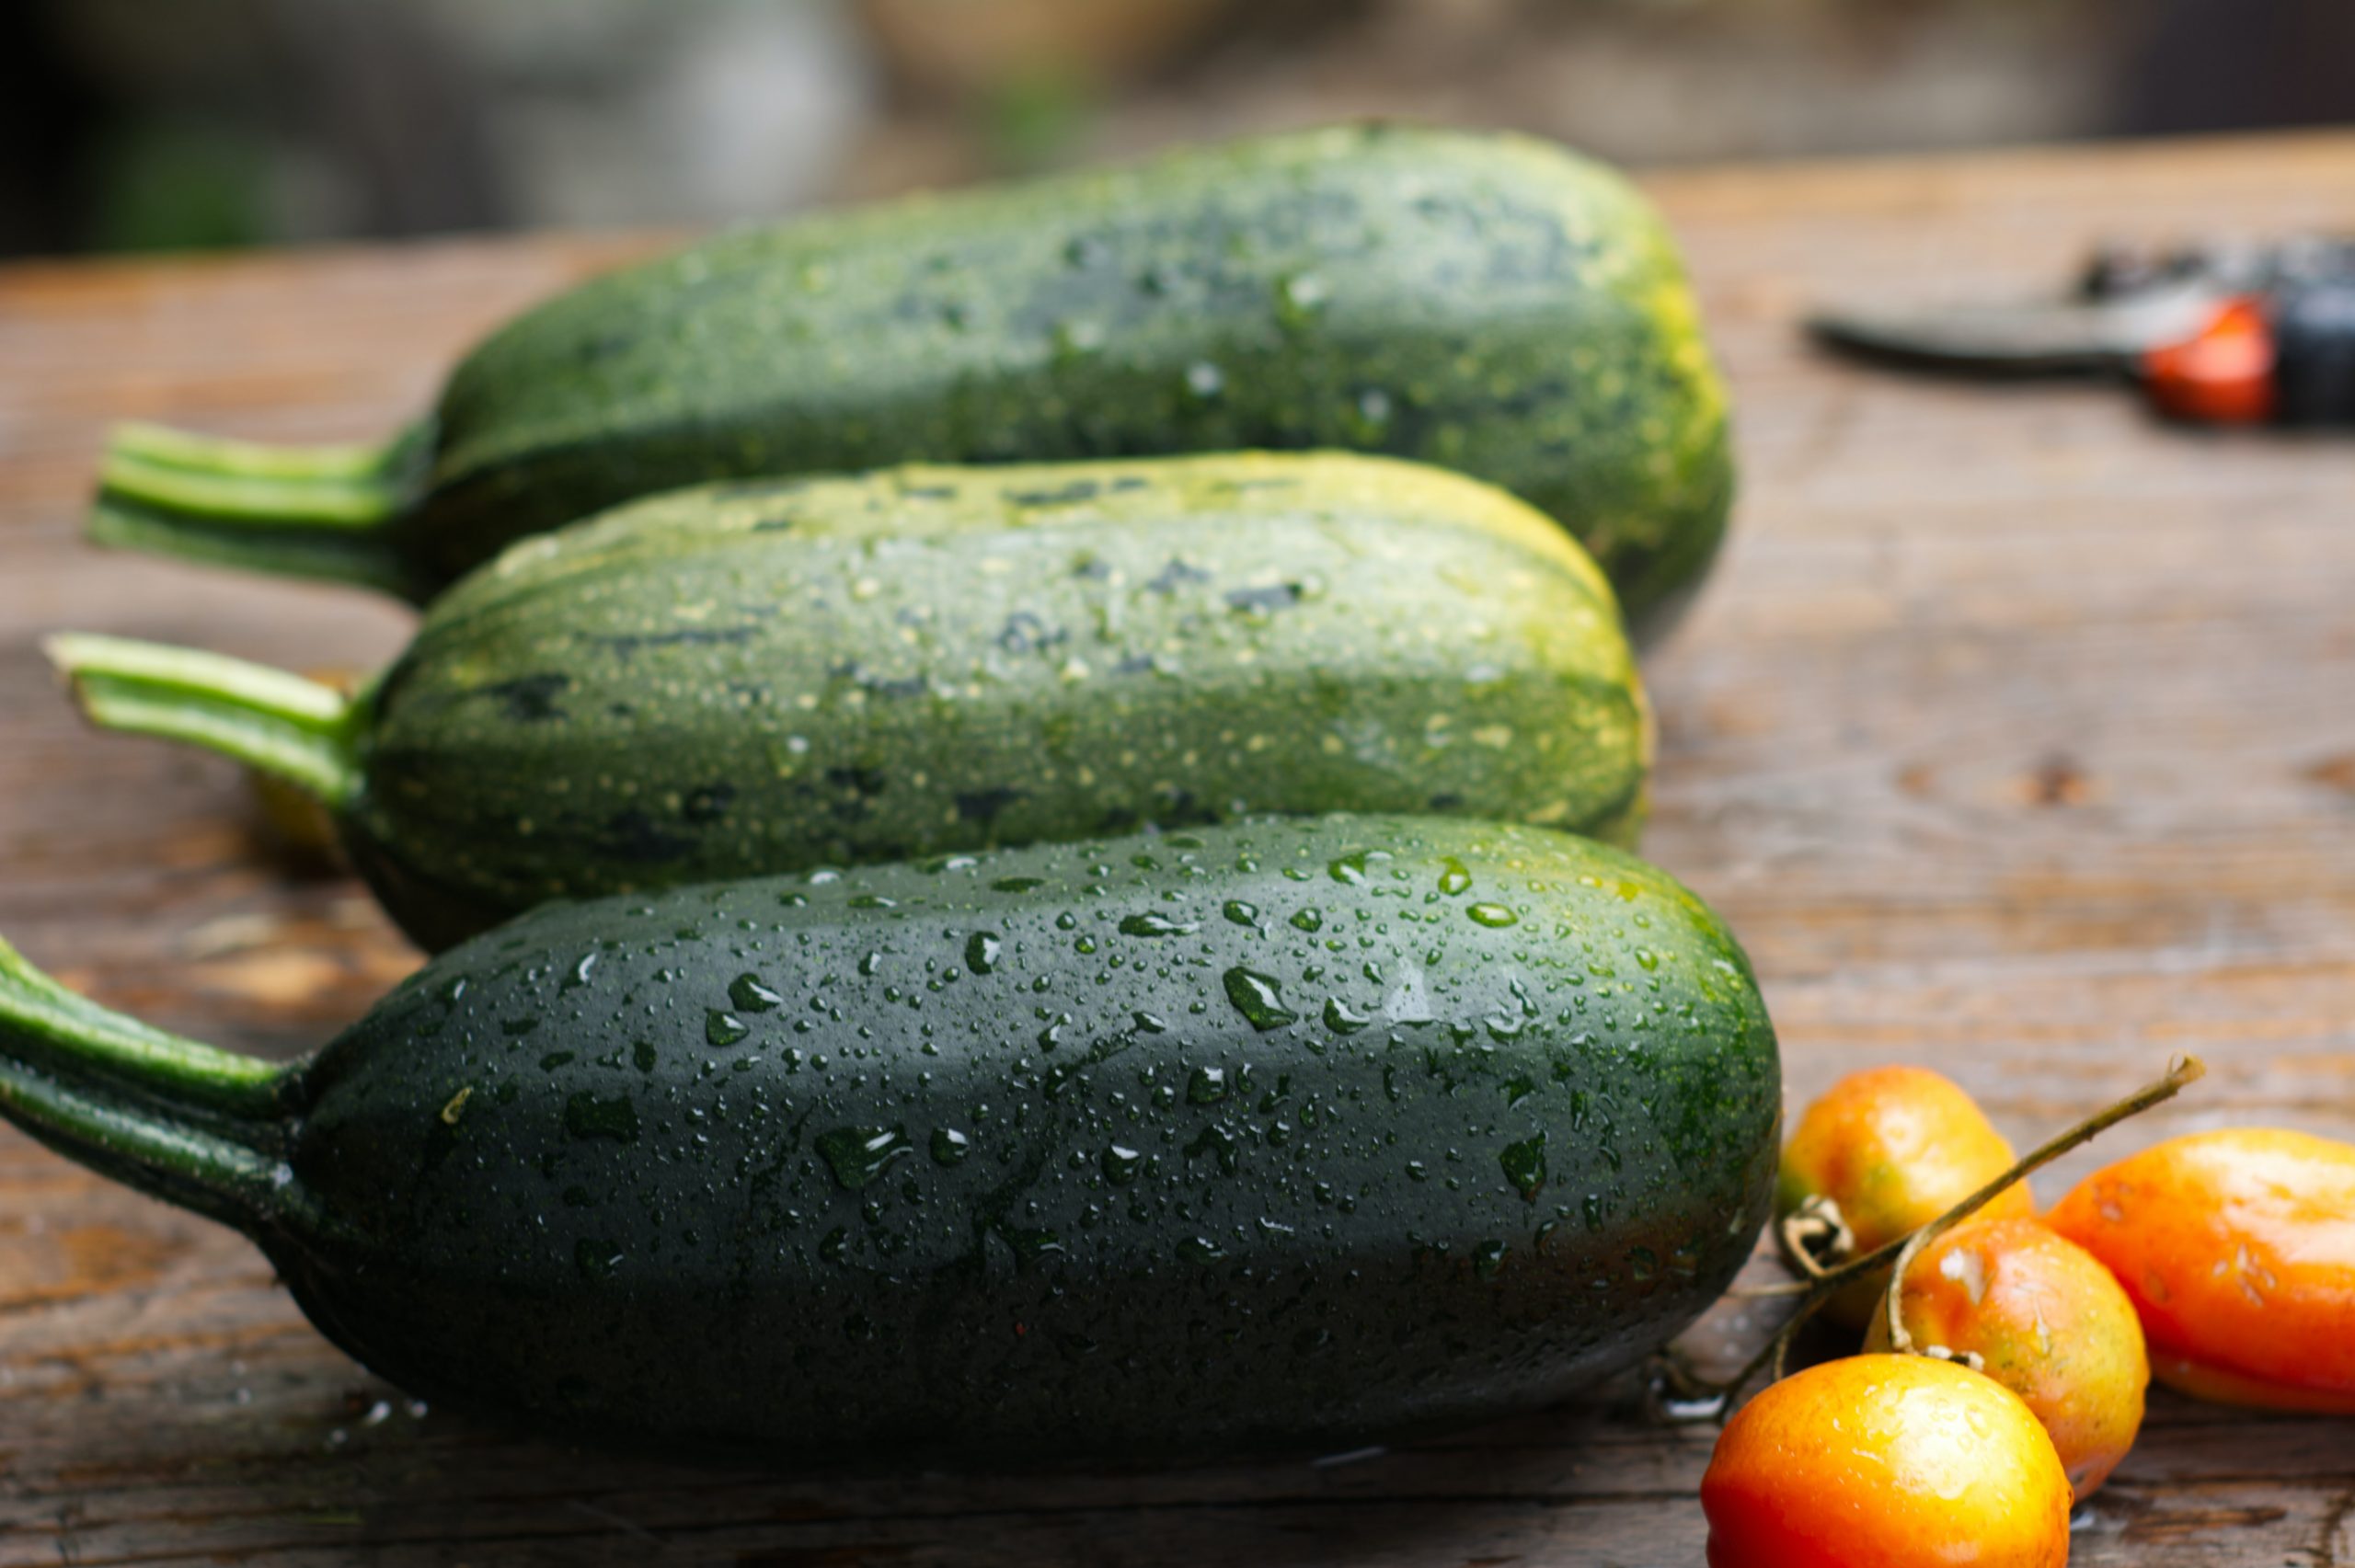 Is It Safe To Eat Zucchini With Powdery Mildew?